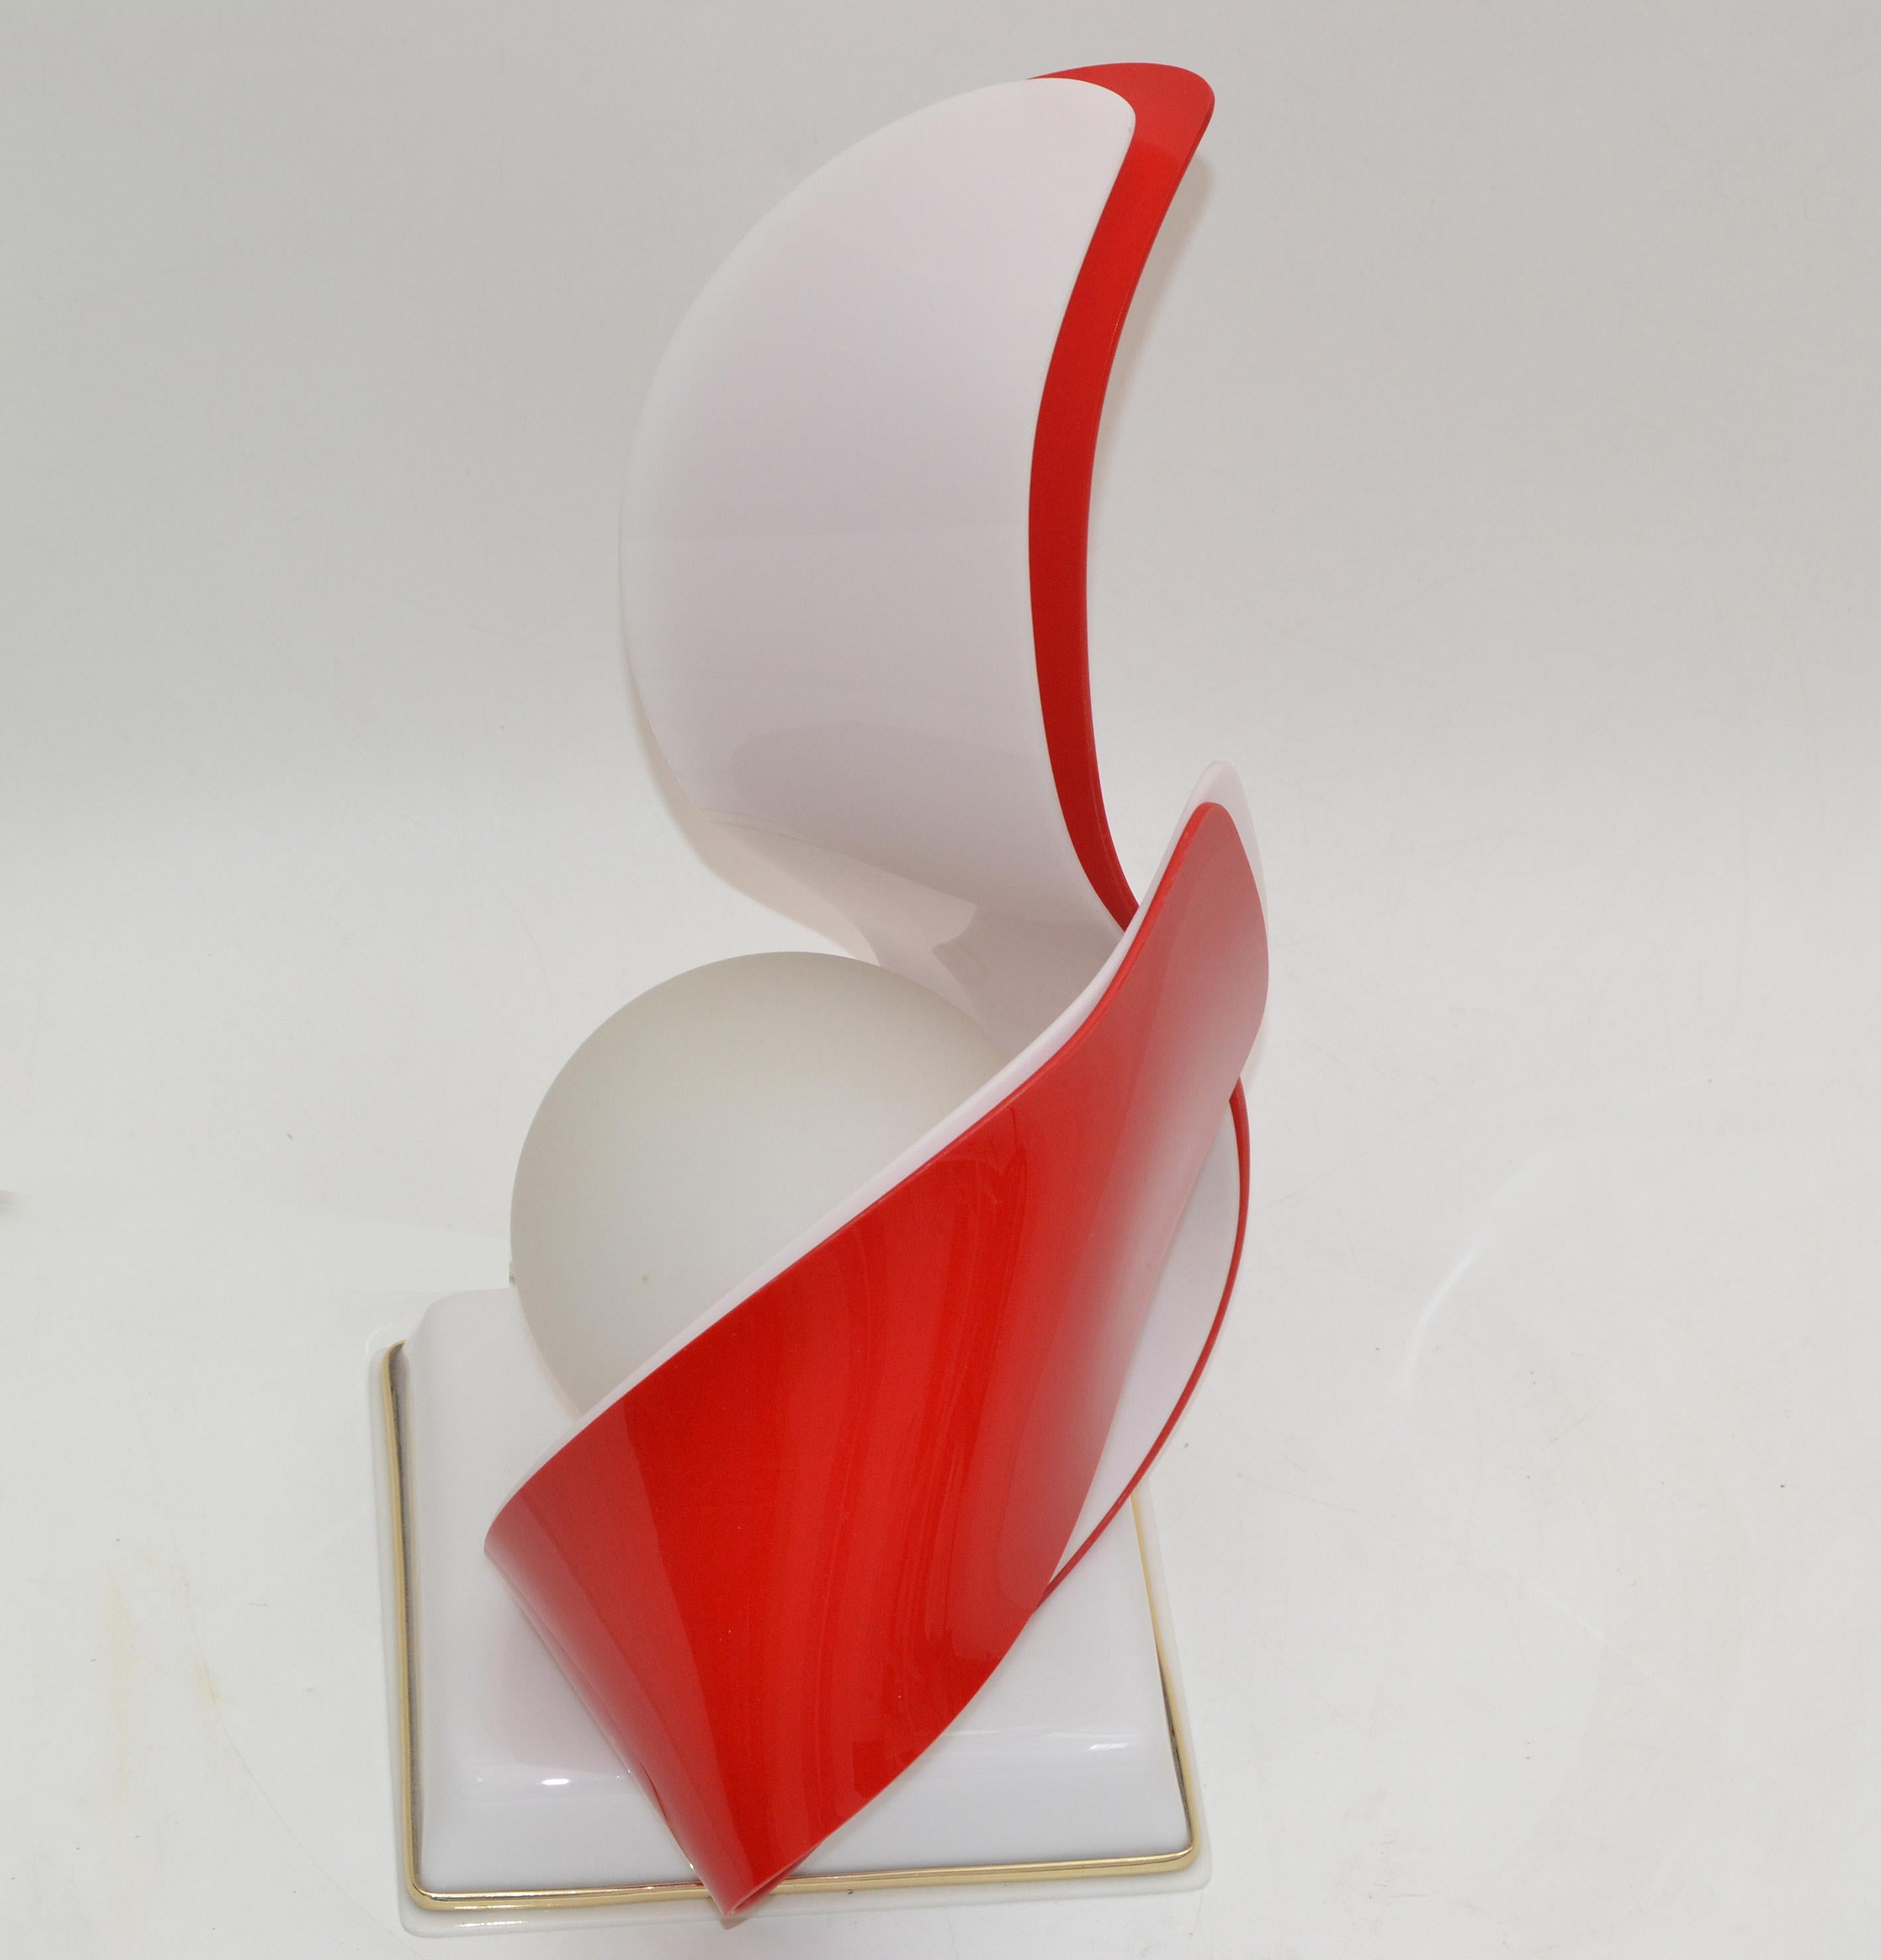 Mid-Century Modern red & white acrylic sculptural table lamp by acrylic designs.
The Lamp has a milk glass globe and takes one max. 40 watts light bulb.
In perfect working condition, wired for the U.S. and has a cord switch.
 